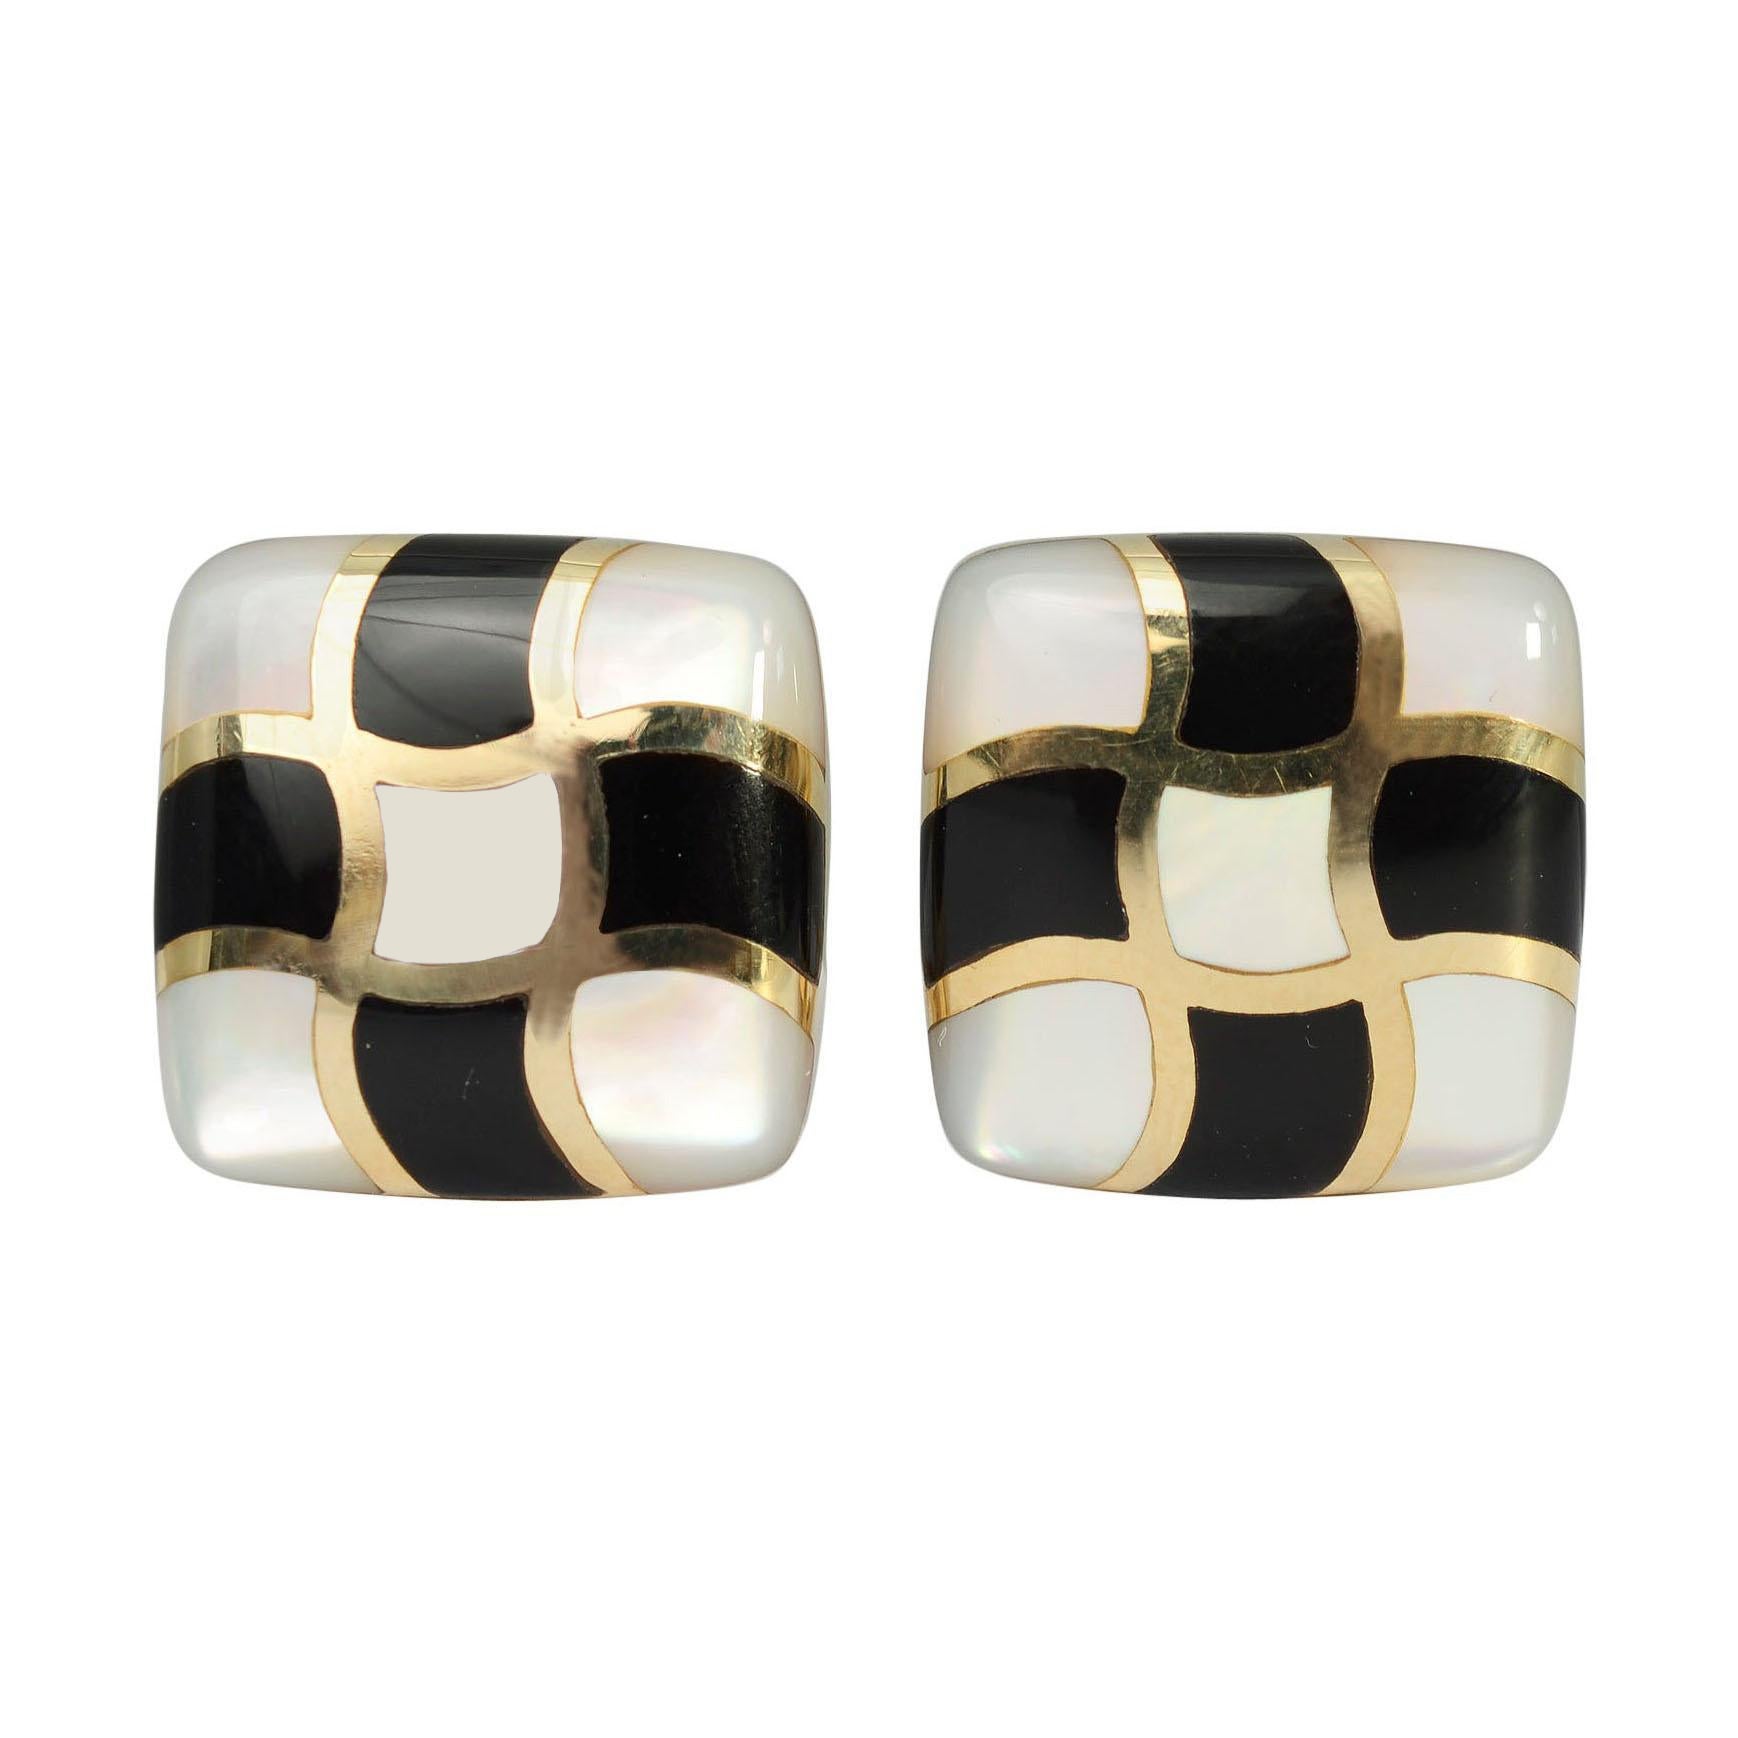 Asch Grossbardt Onyx and Mother of Pearl Earrings For Sale